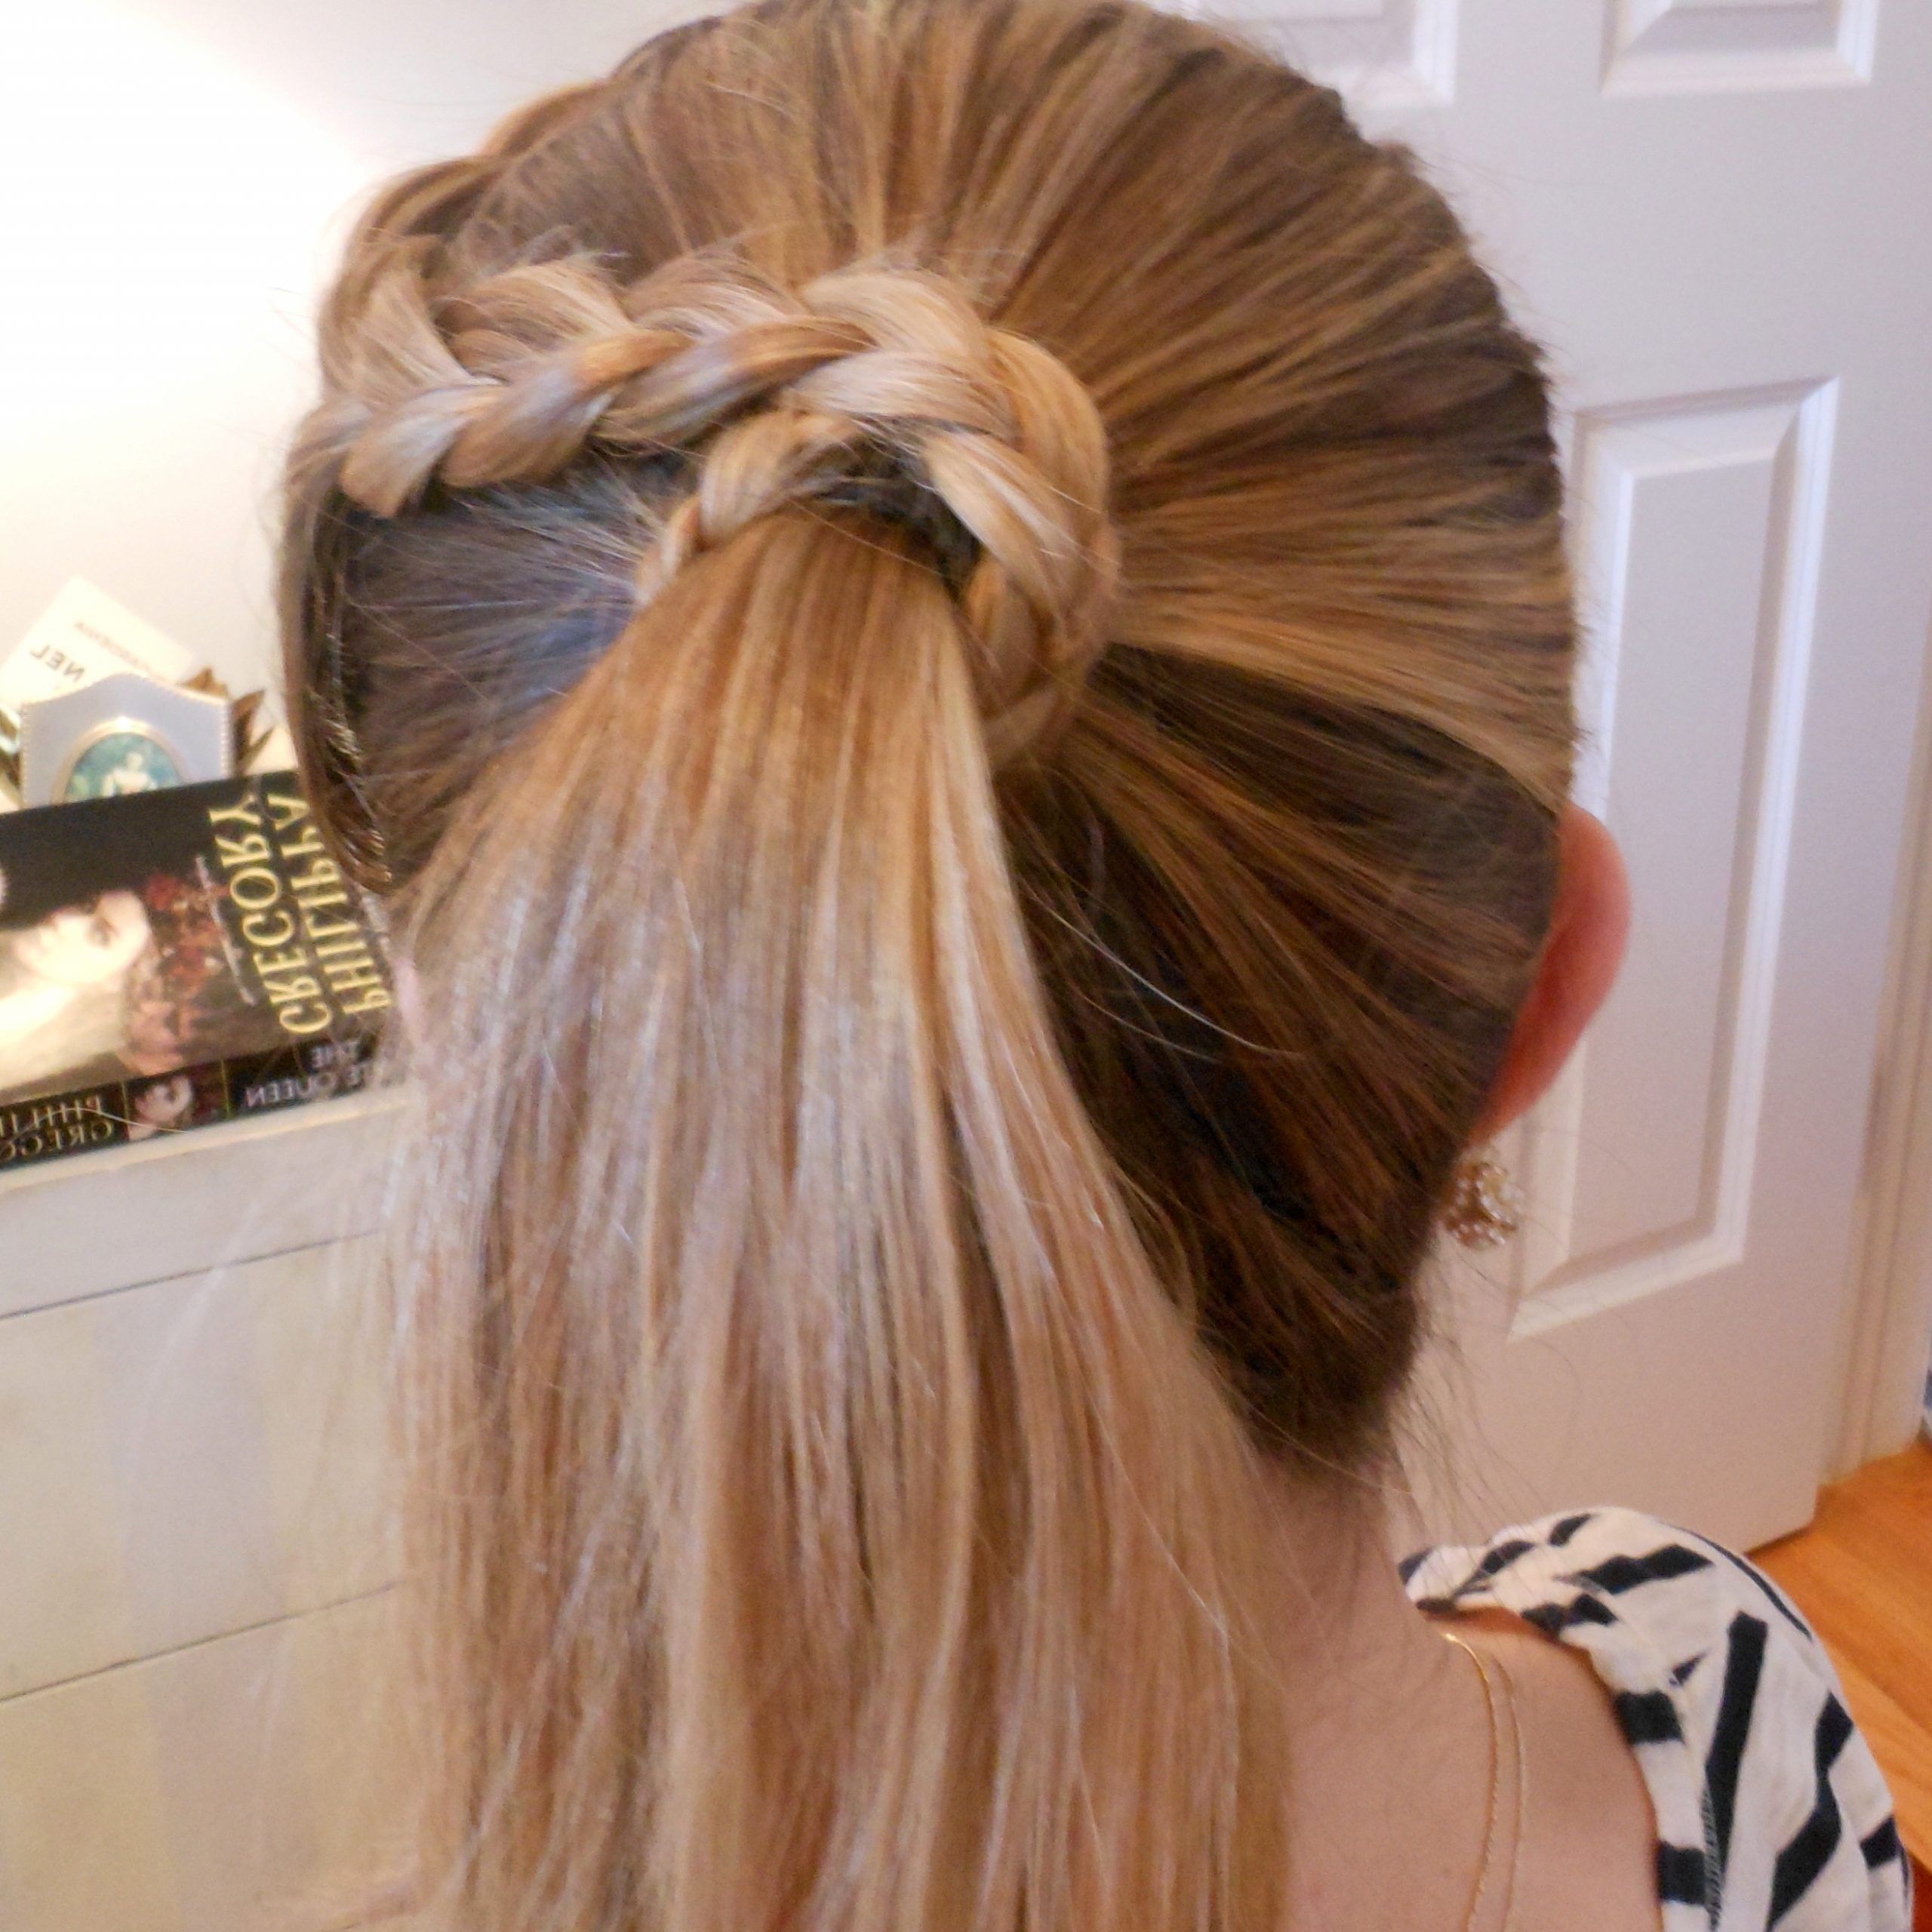 Hairstyle From Three Angles: Crown Braid Ponytail With Regard To Popular Angular Crown Braid Hairstyles (View 12 of 20)